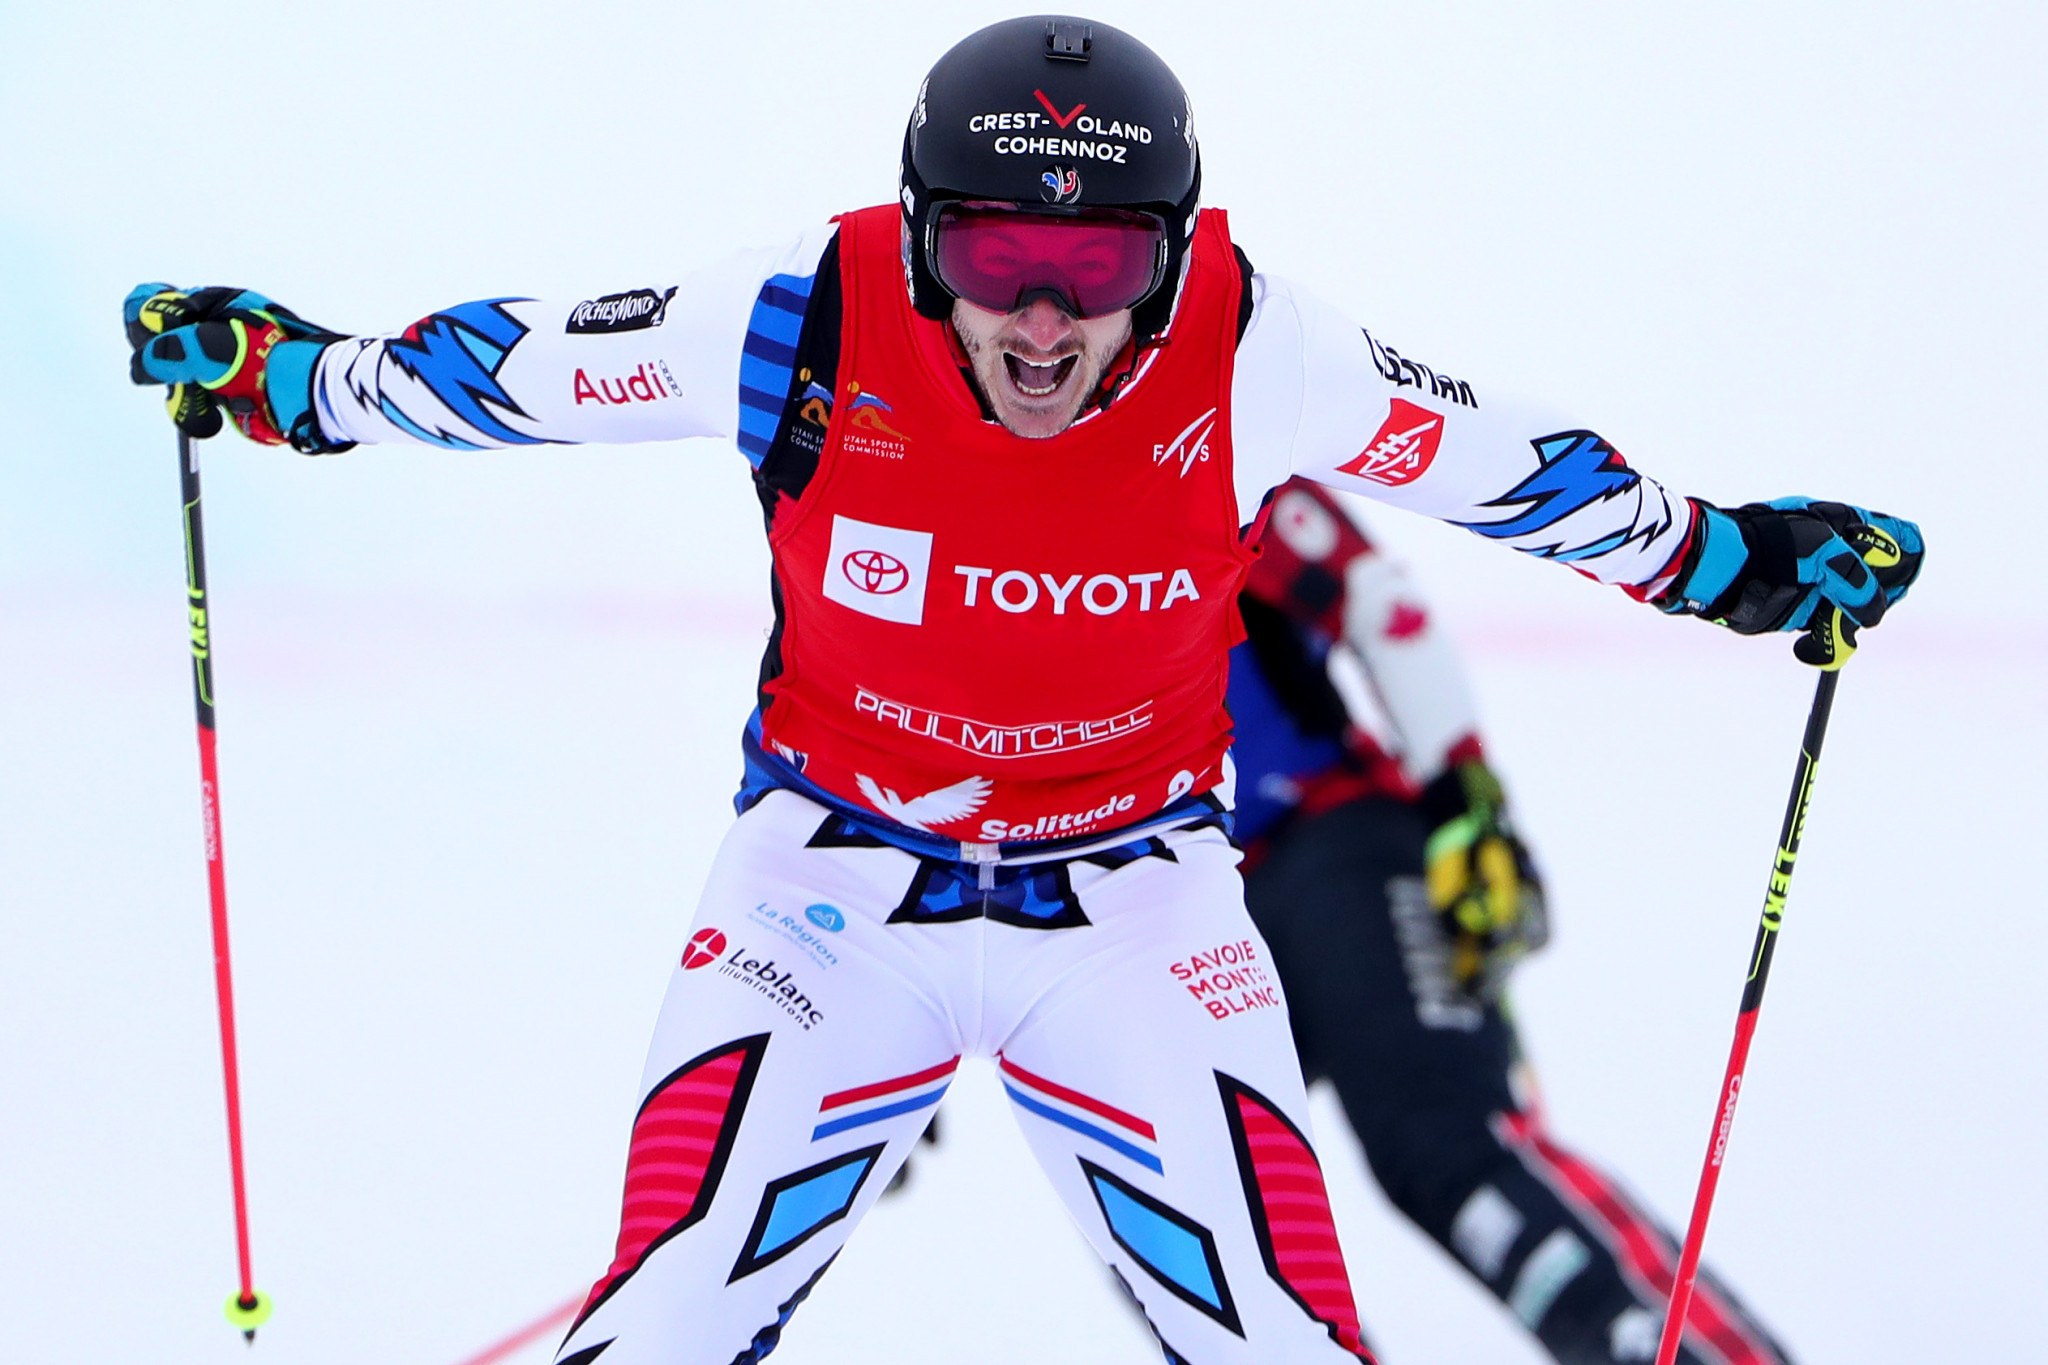 Newly-crowned world champion Place tops men's qualification at FIS Ski Cross World Cup